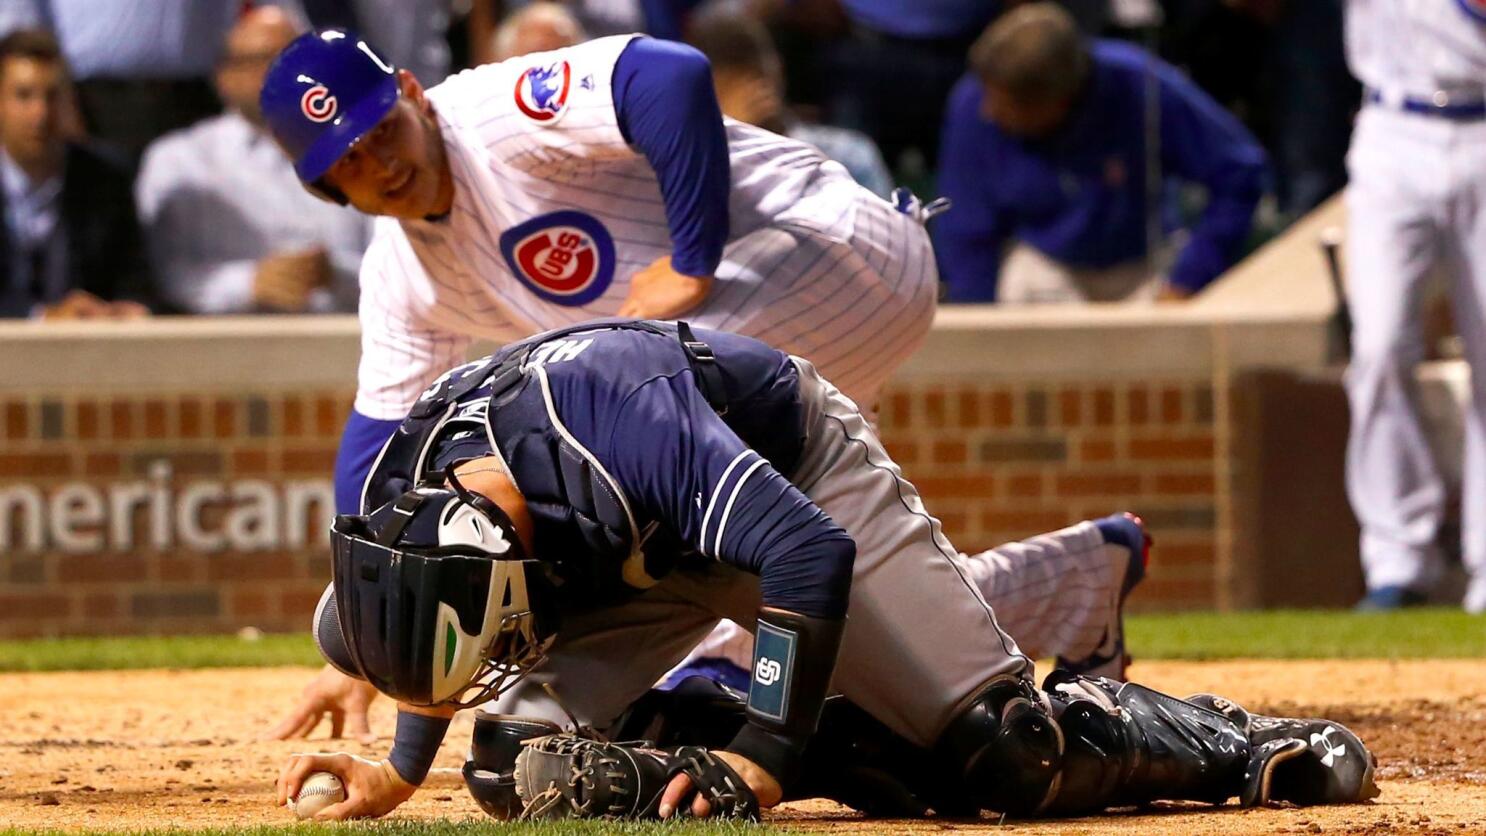 Anthony Rizzo did not take kindly to how hard Willson Contreras